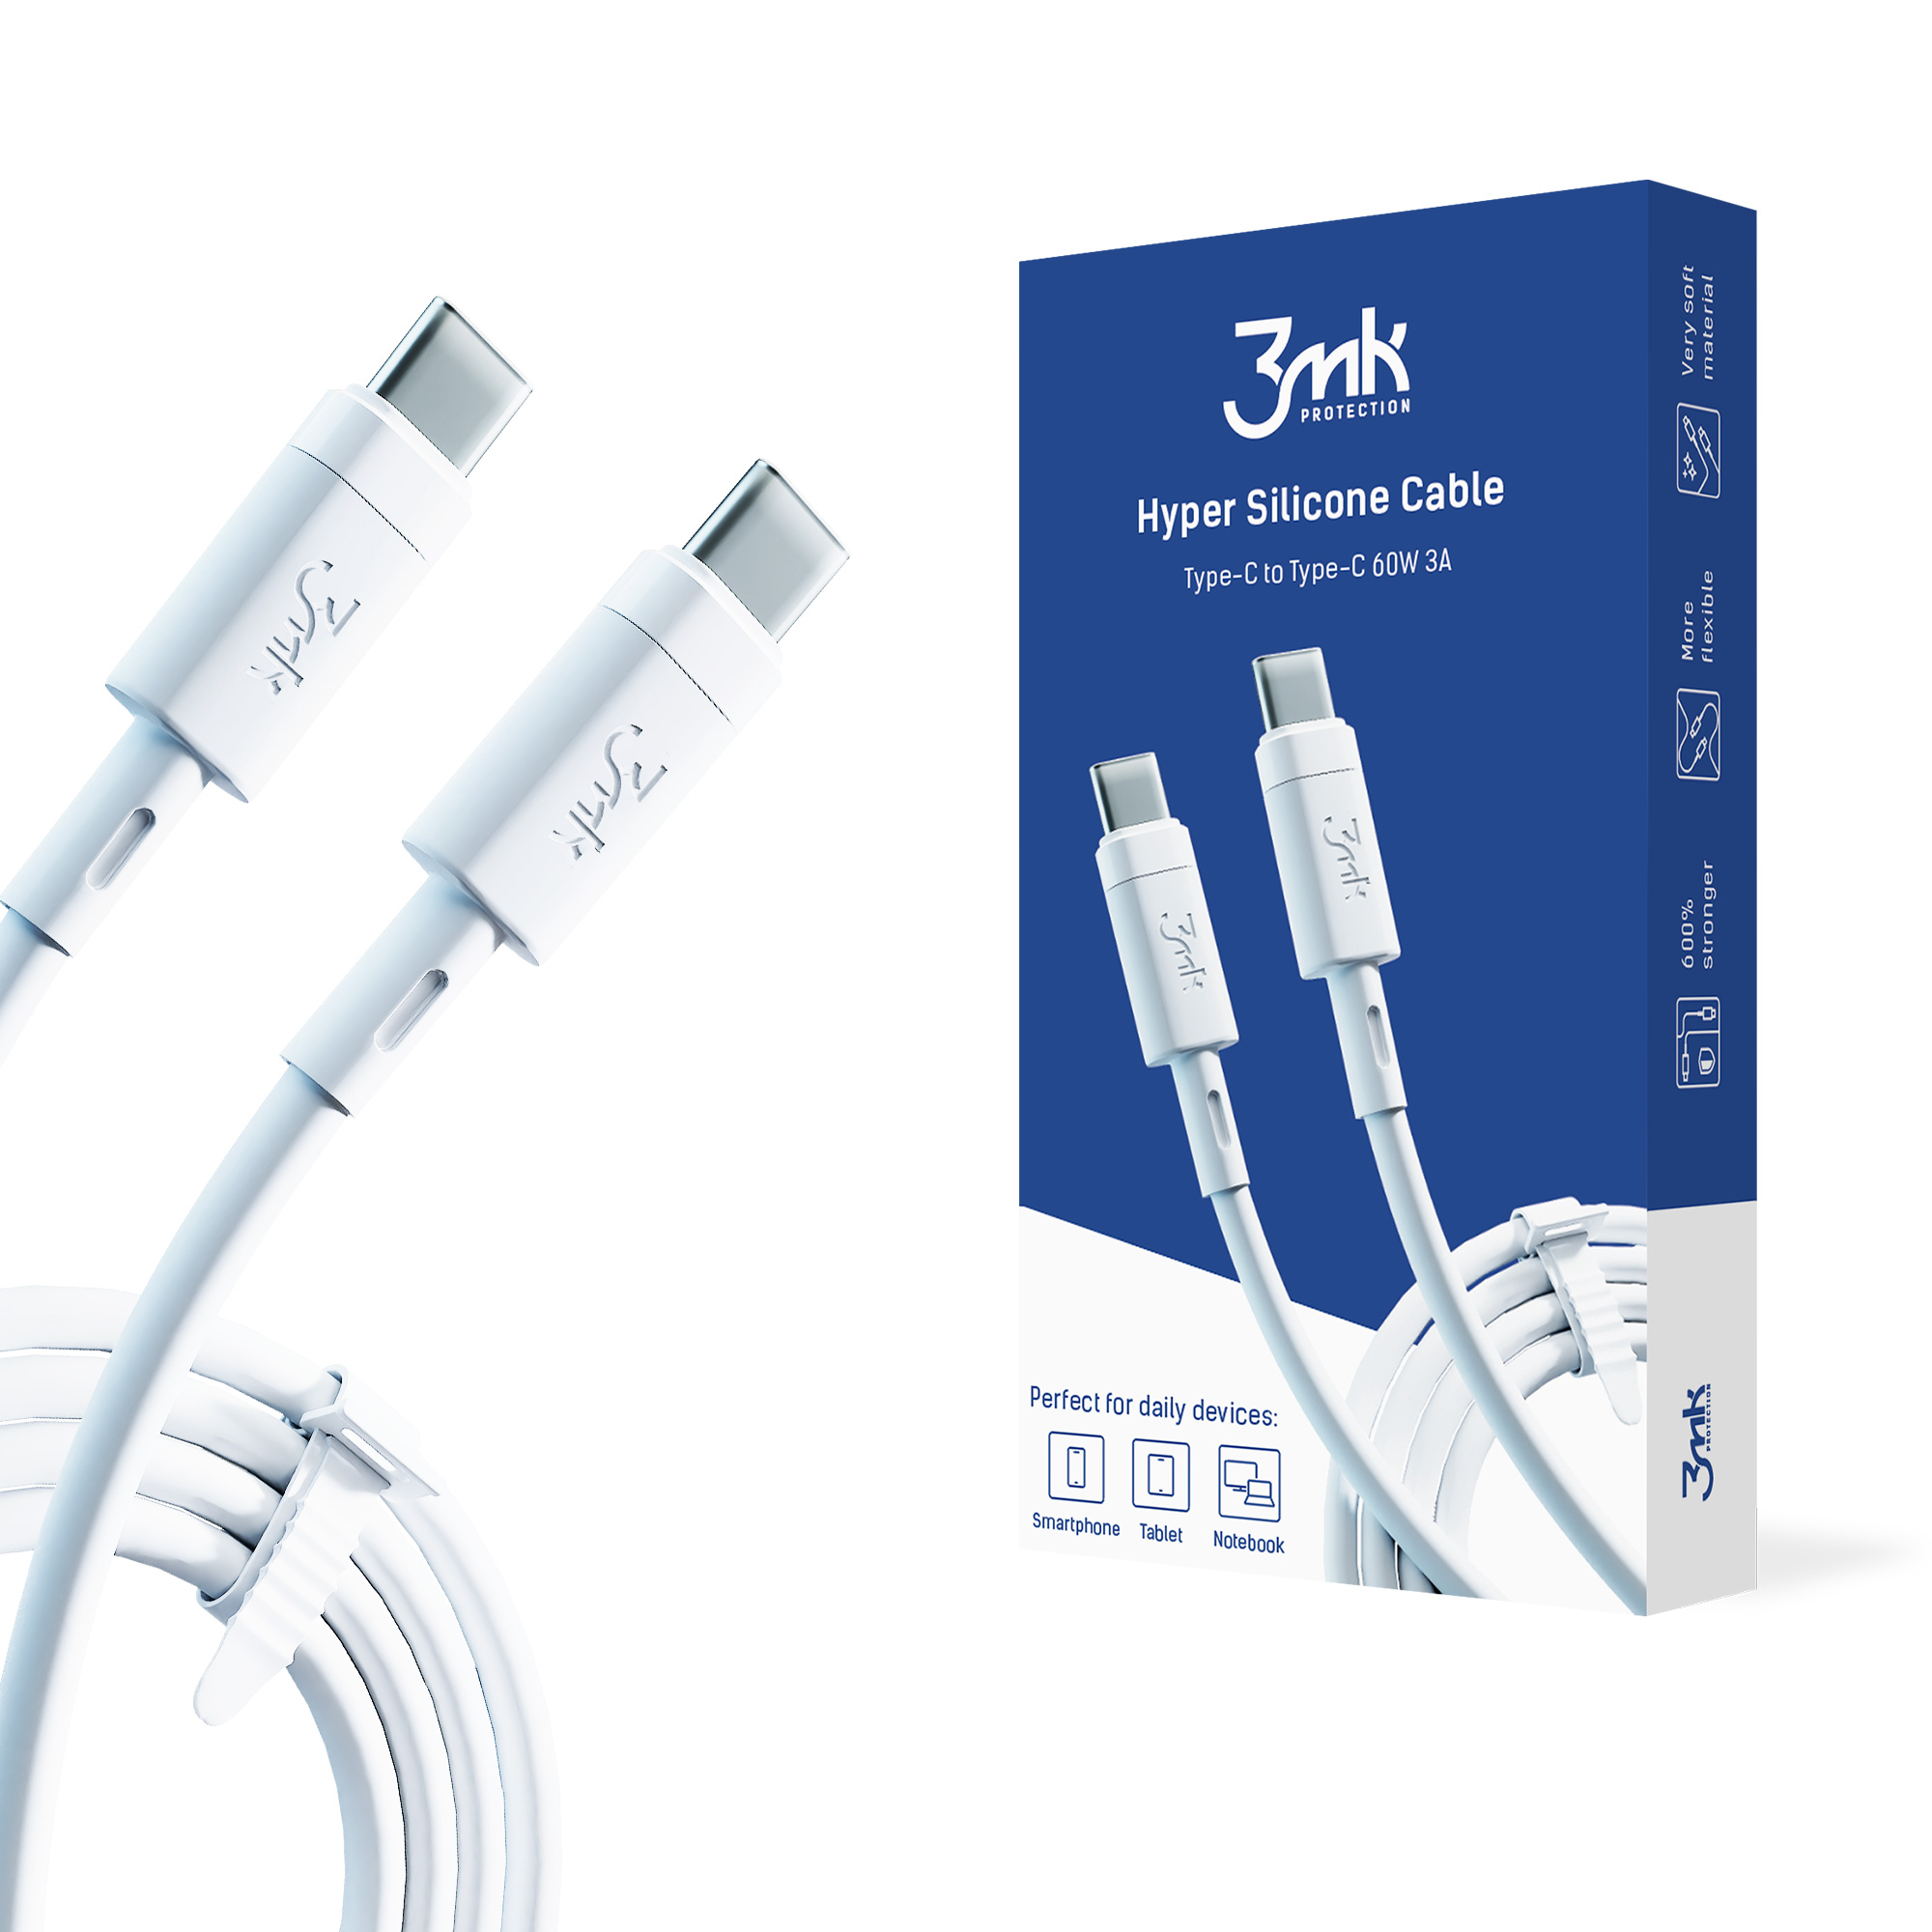 accessories-3mk-hyper-silicone-cable-type-c-to-type-c-60w-3a.jpg